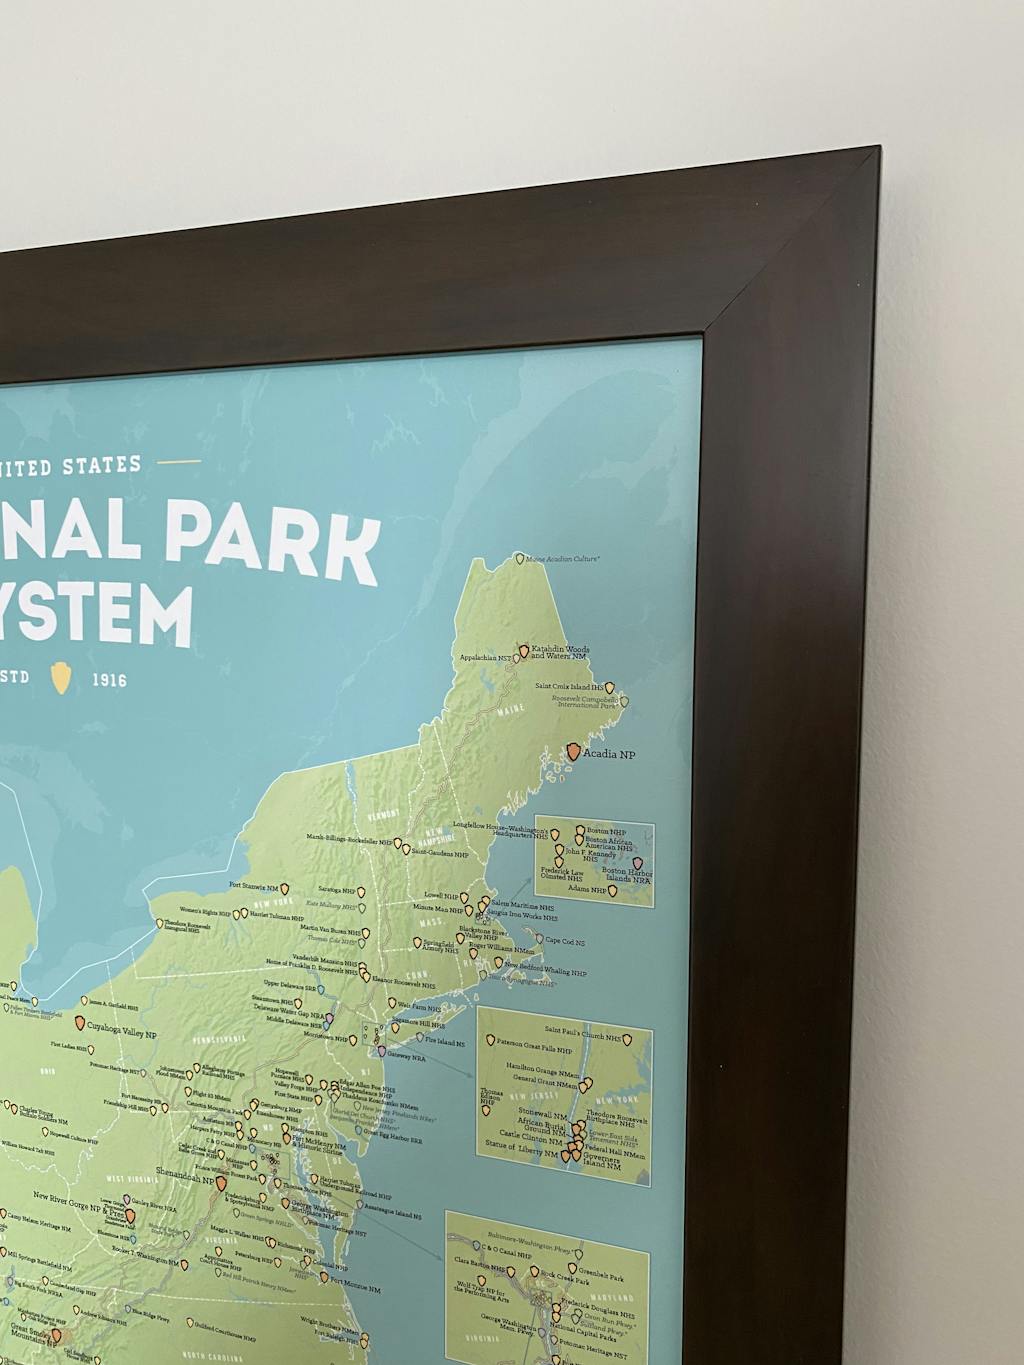 423 National Park System Units Map 24x36 Poster Best Maps Ever 7753